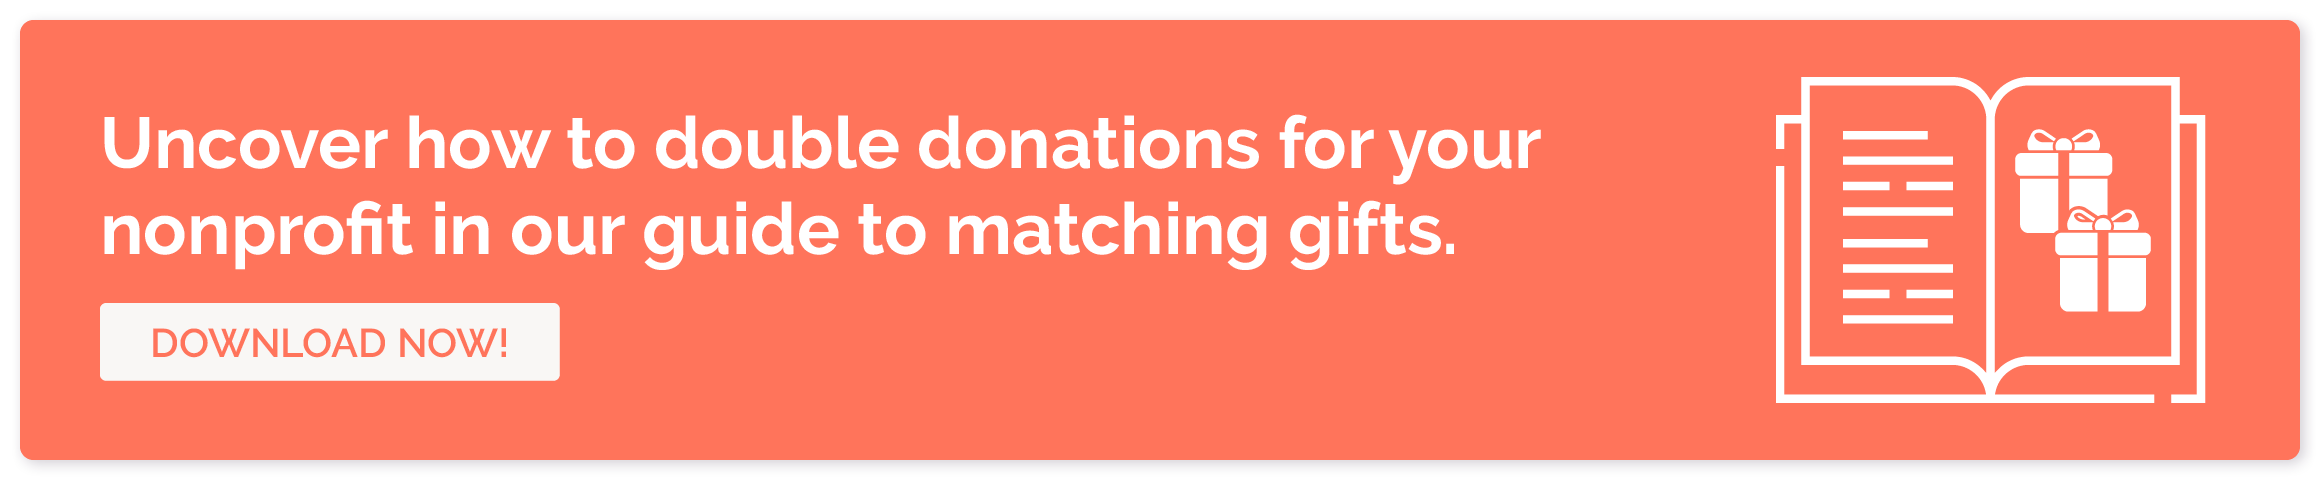 Uncover how to double donations for your nonprofit in our guide to matching gifts. Download now!